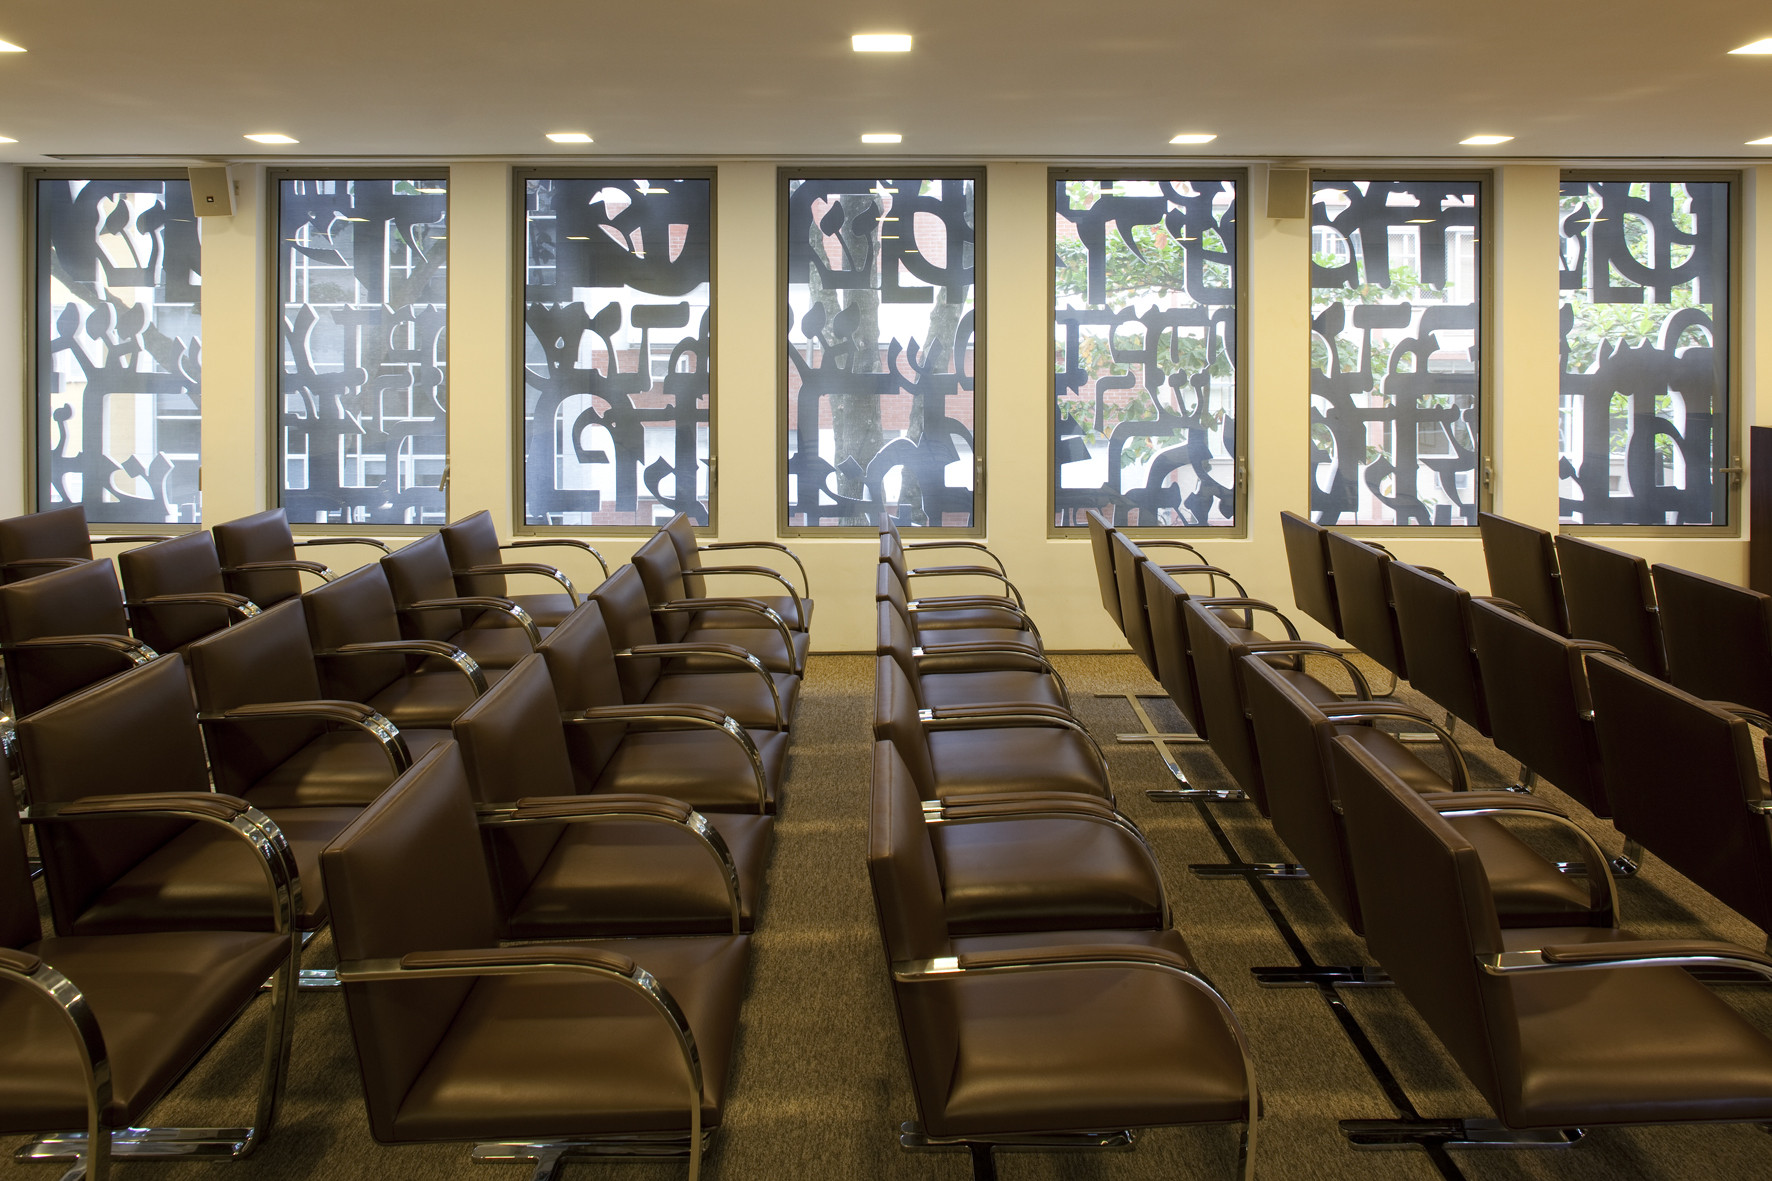 Transversal view of the seminar room of the second floor with th